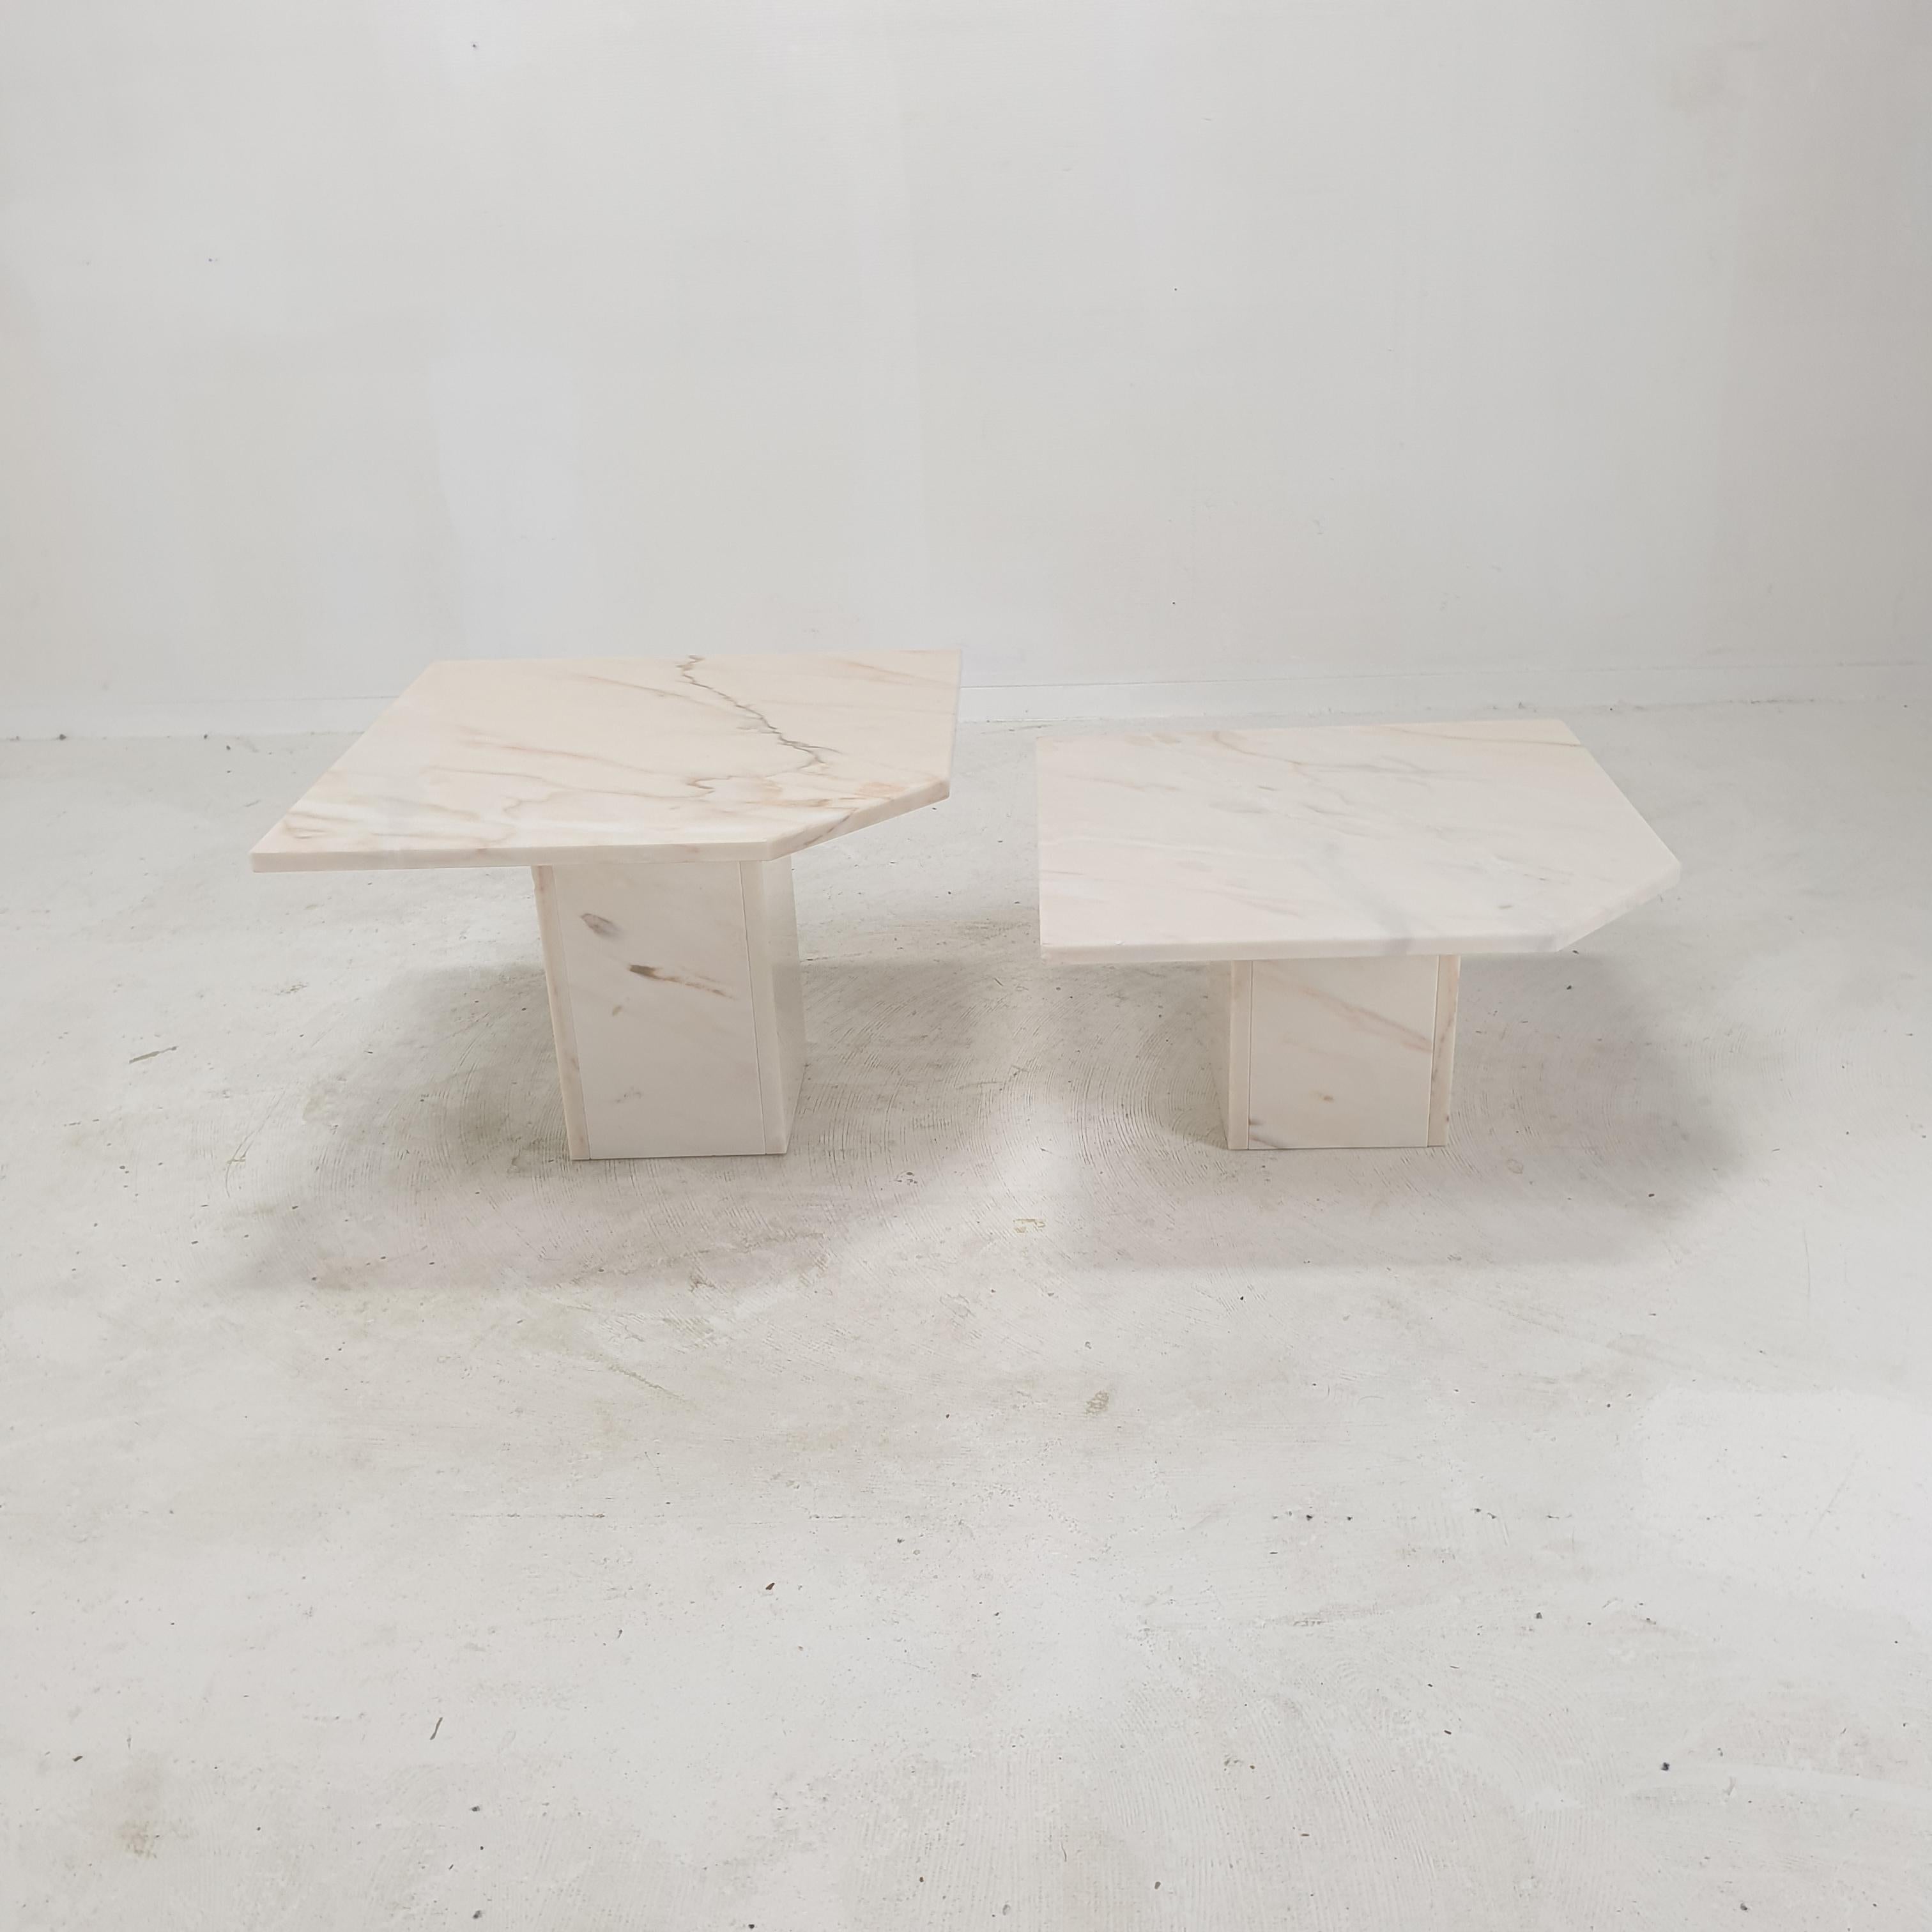 Very nice set of 2 Italian side tables, fabricated in the early 80's.
They can also be used as a coffee table.

They are handcrafted out of very beautiful marble.
The fabulous marble features a very nice pattern of different colors. 

They